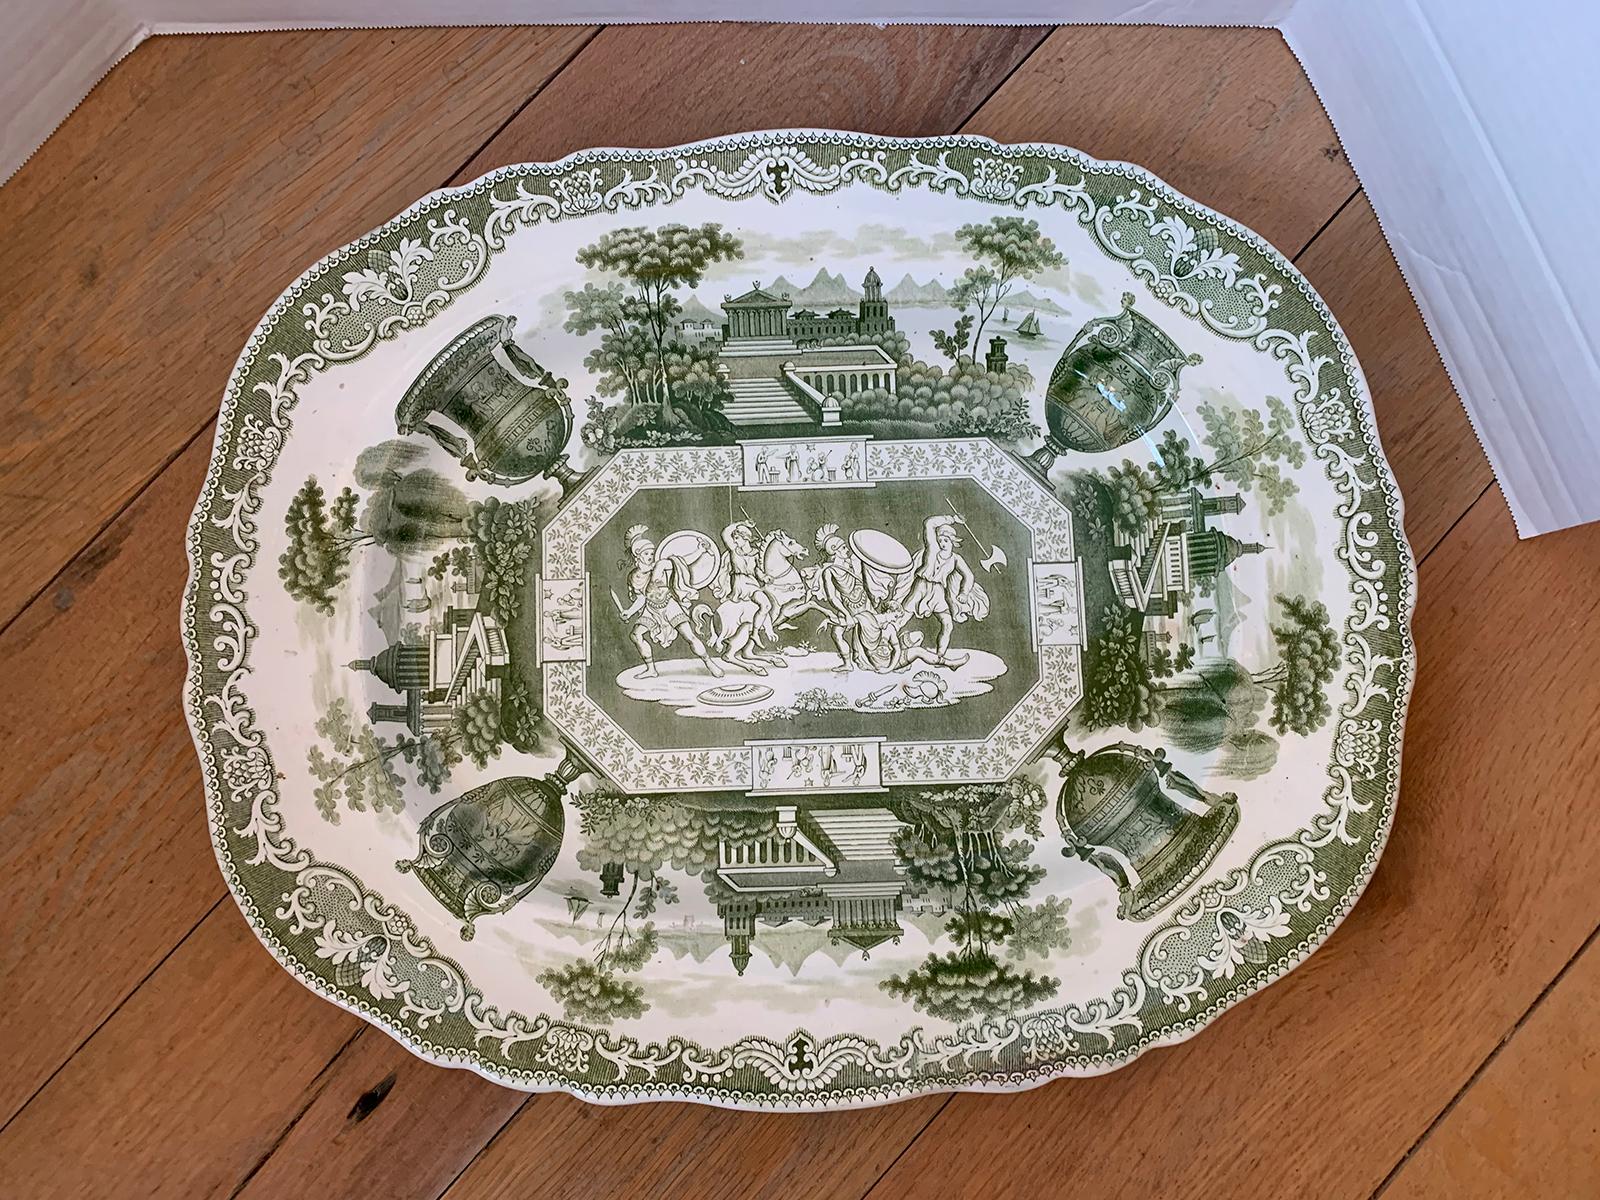 19th century English green and white transferware stone China porcelain oval charger or meat platter with unidentified mark 